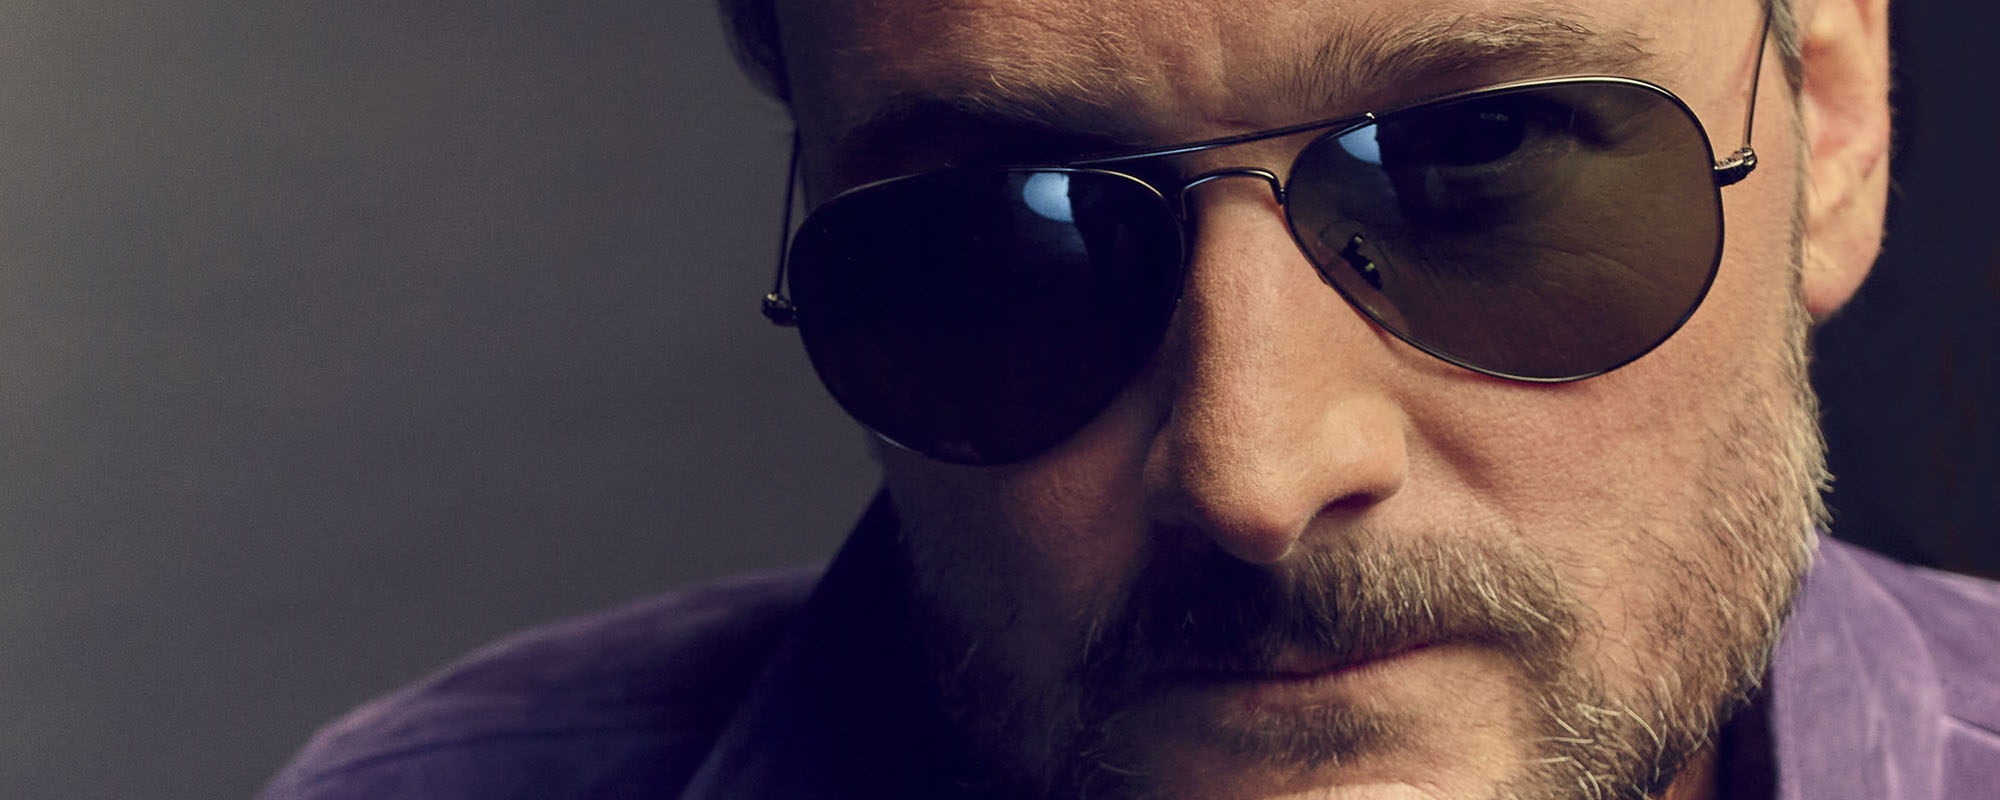 Eric Church Releases “Break It Kind of Guy” From His Three-Part Project ‘Heart & Soul’